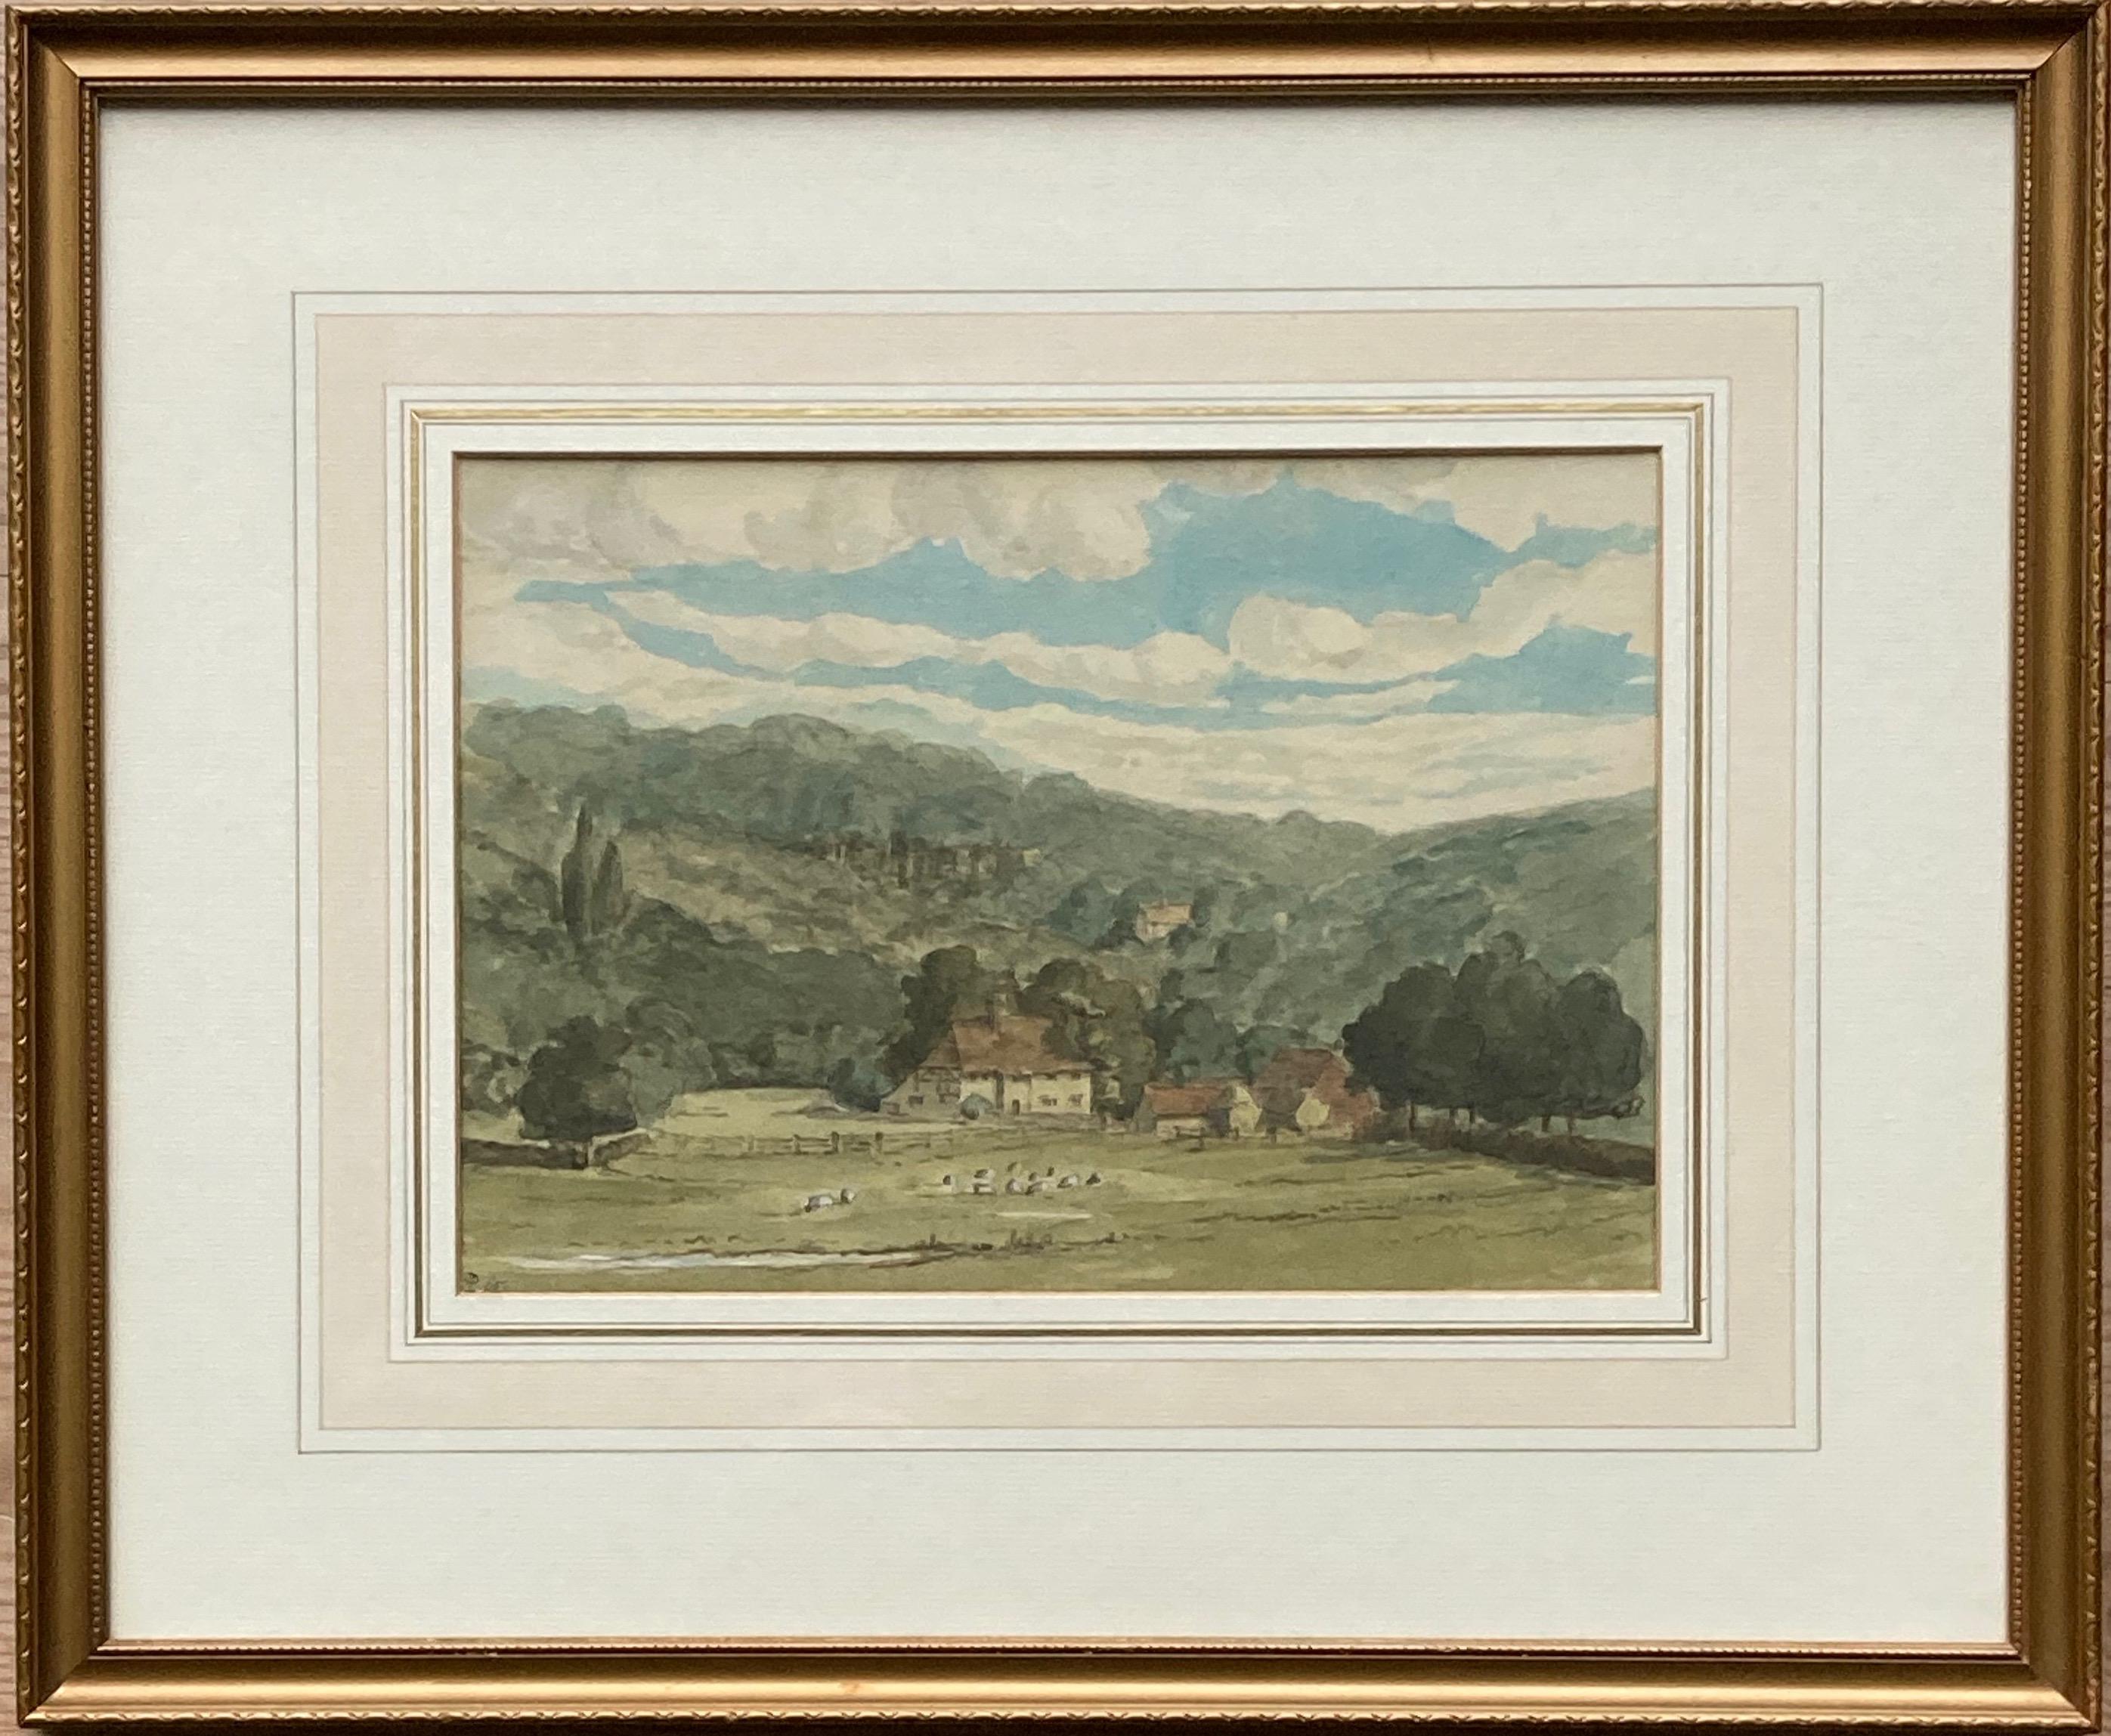 A charming rural scene painted in the style of Thomas Girtin with good strong colours.

Circle of Thomas Girtin
Sheep in a hilly pasture with a farmhouse
Signed with initials and dated 